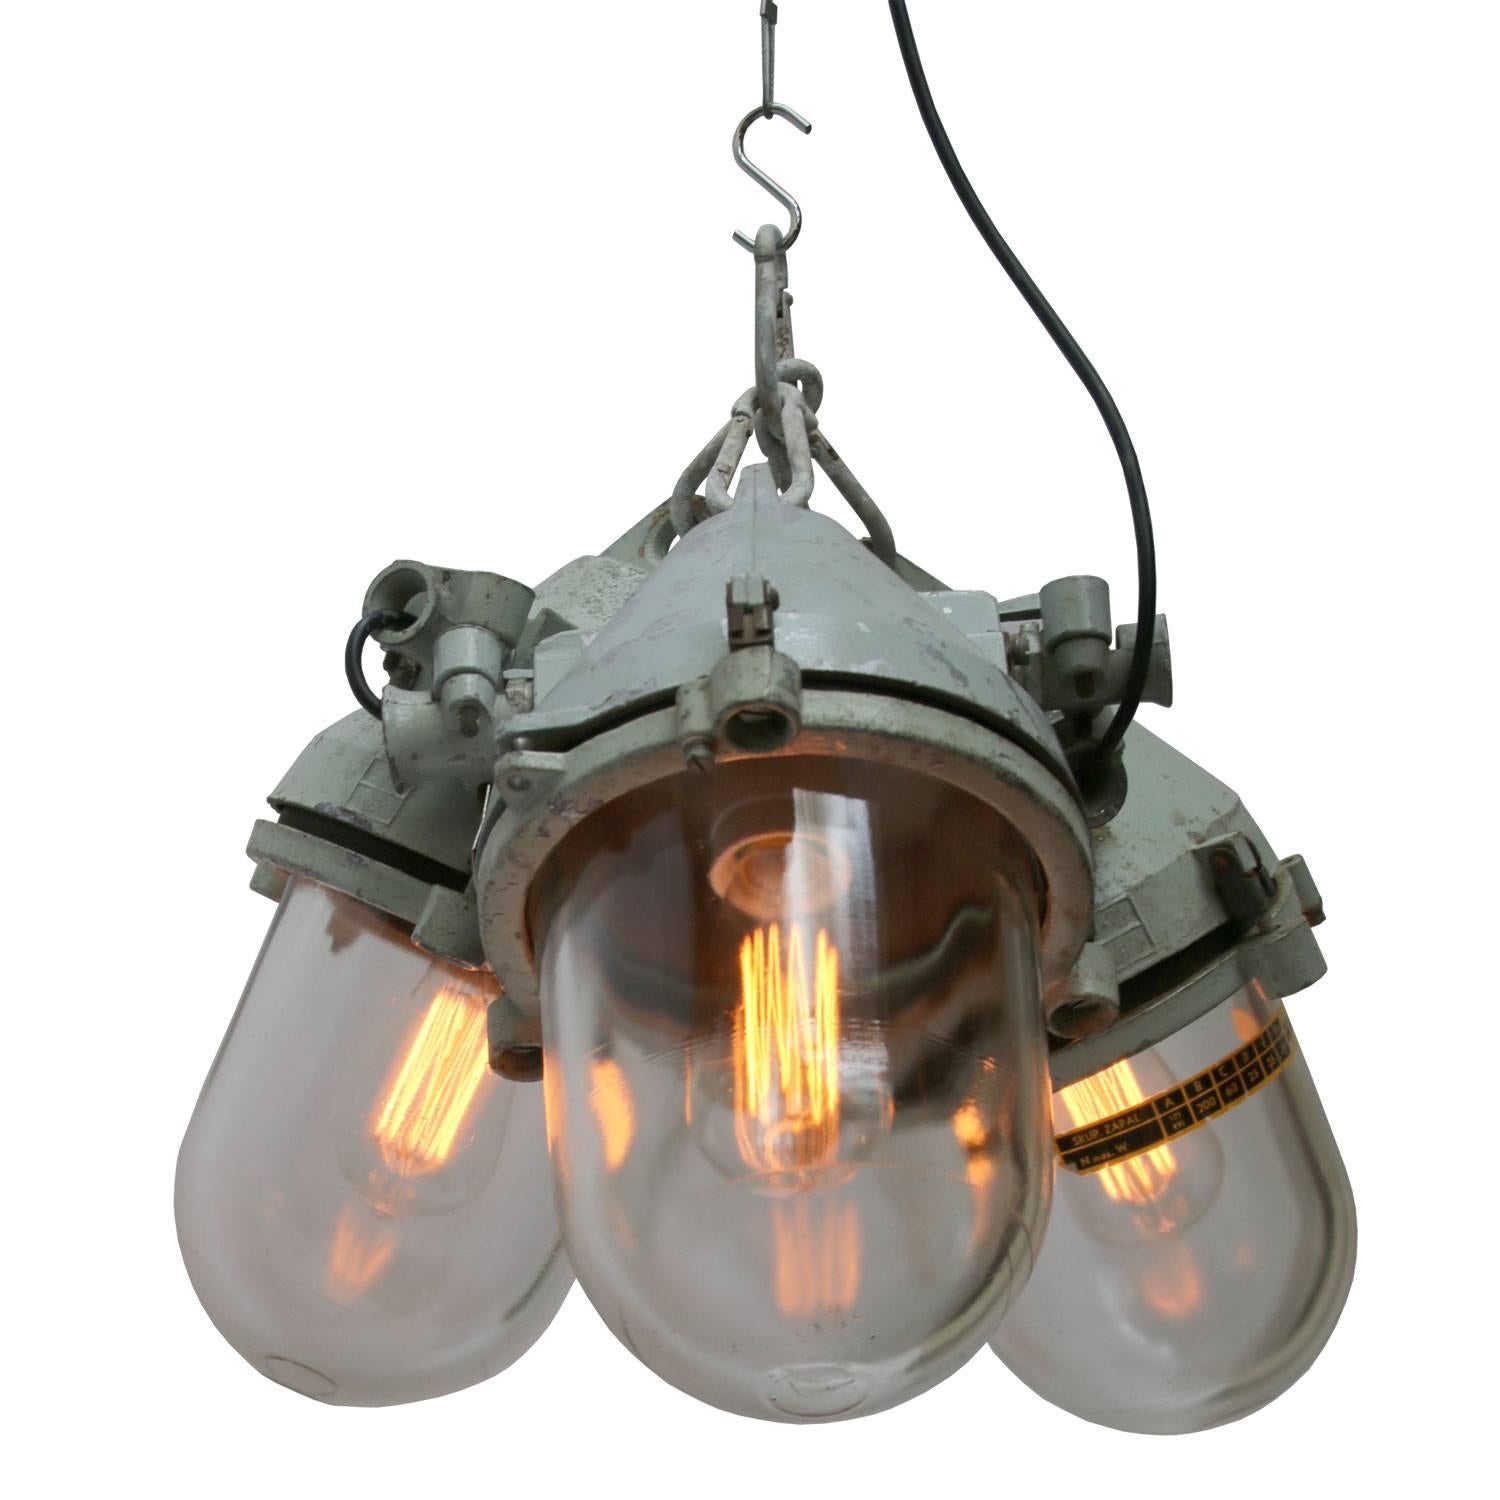 Triple Industrial lamps.
Grey aluminum top, clear glass.

All lamps have been made suitable by international standards for incandescent light bulbs, energy-efficient and LED bulbs with an E26/E27 socket, new wiring CE certified or UL Listed. Max